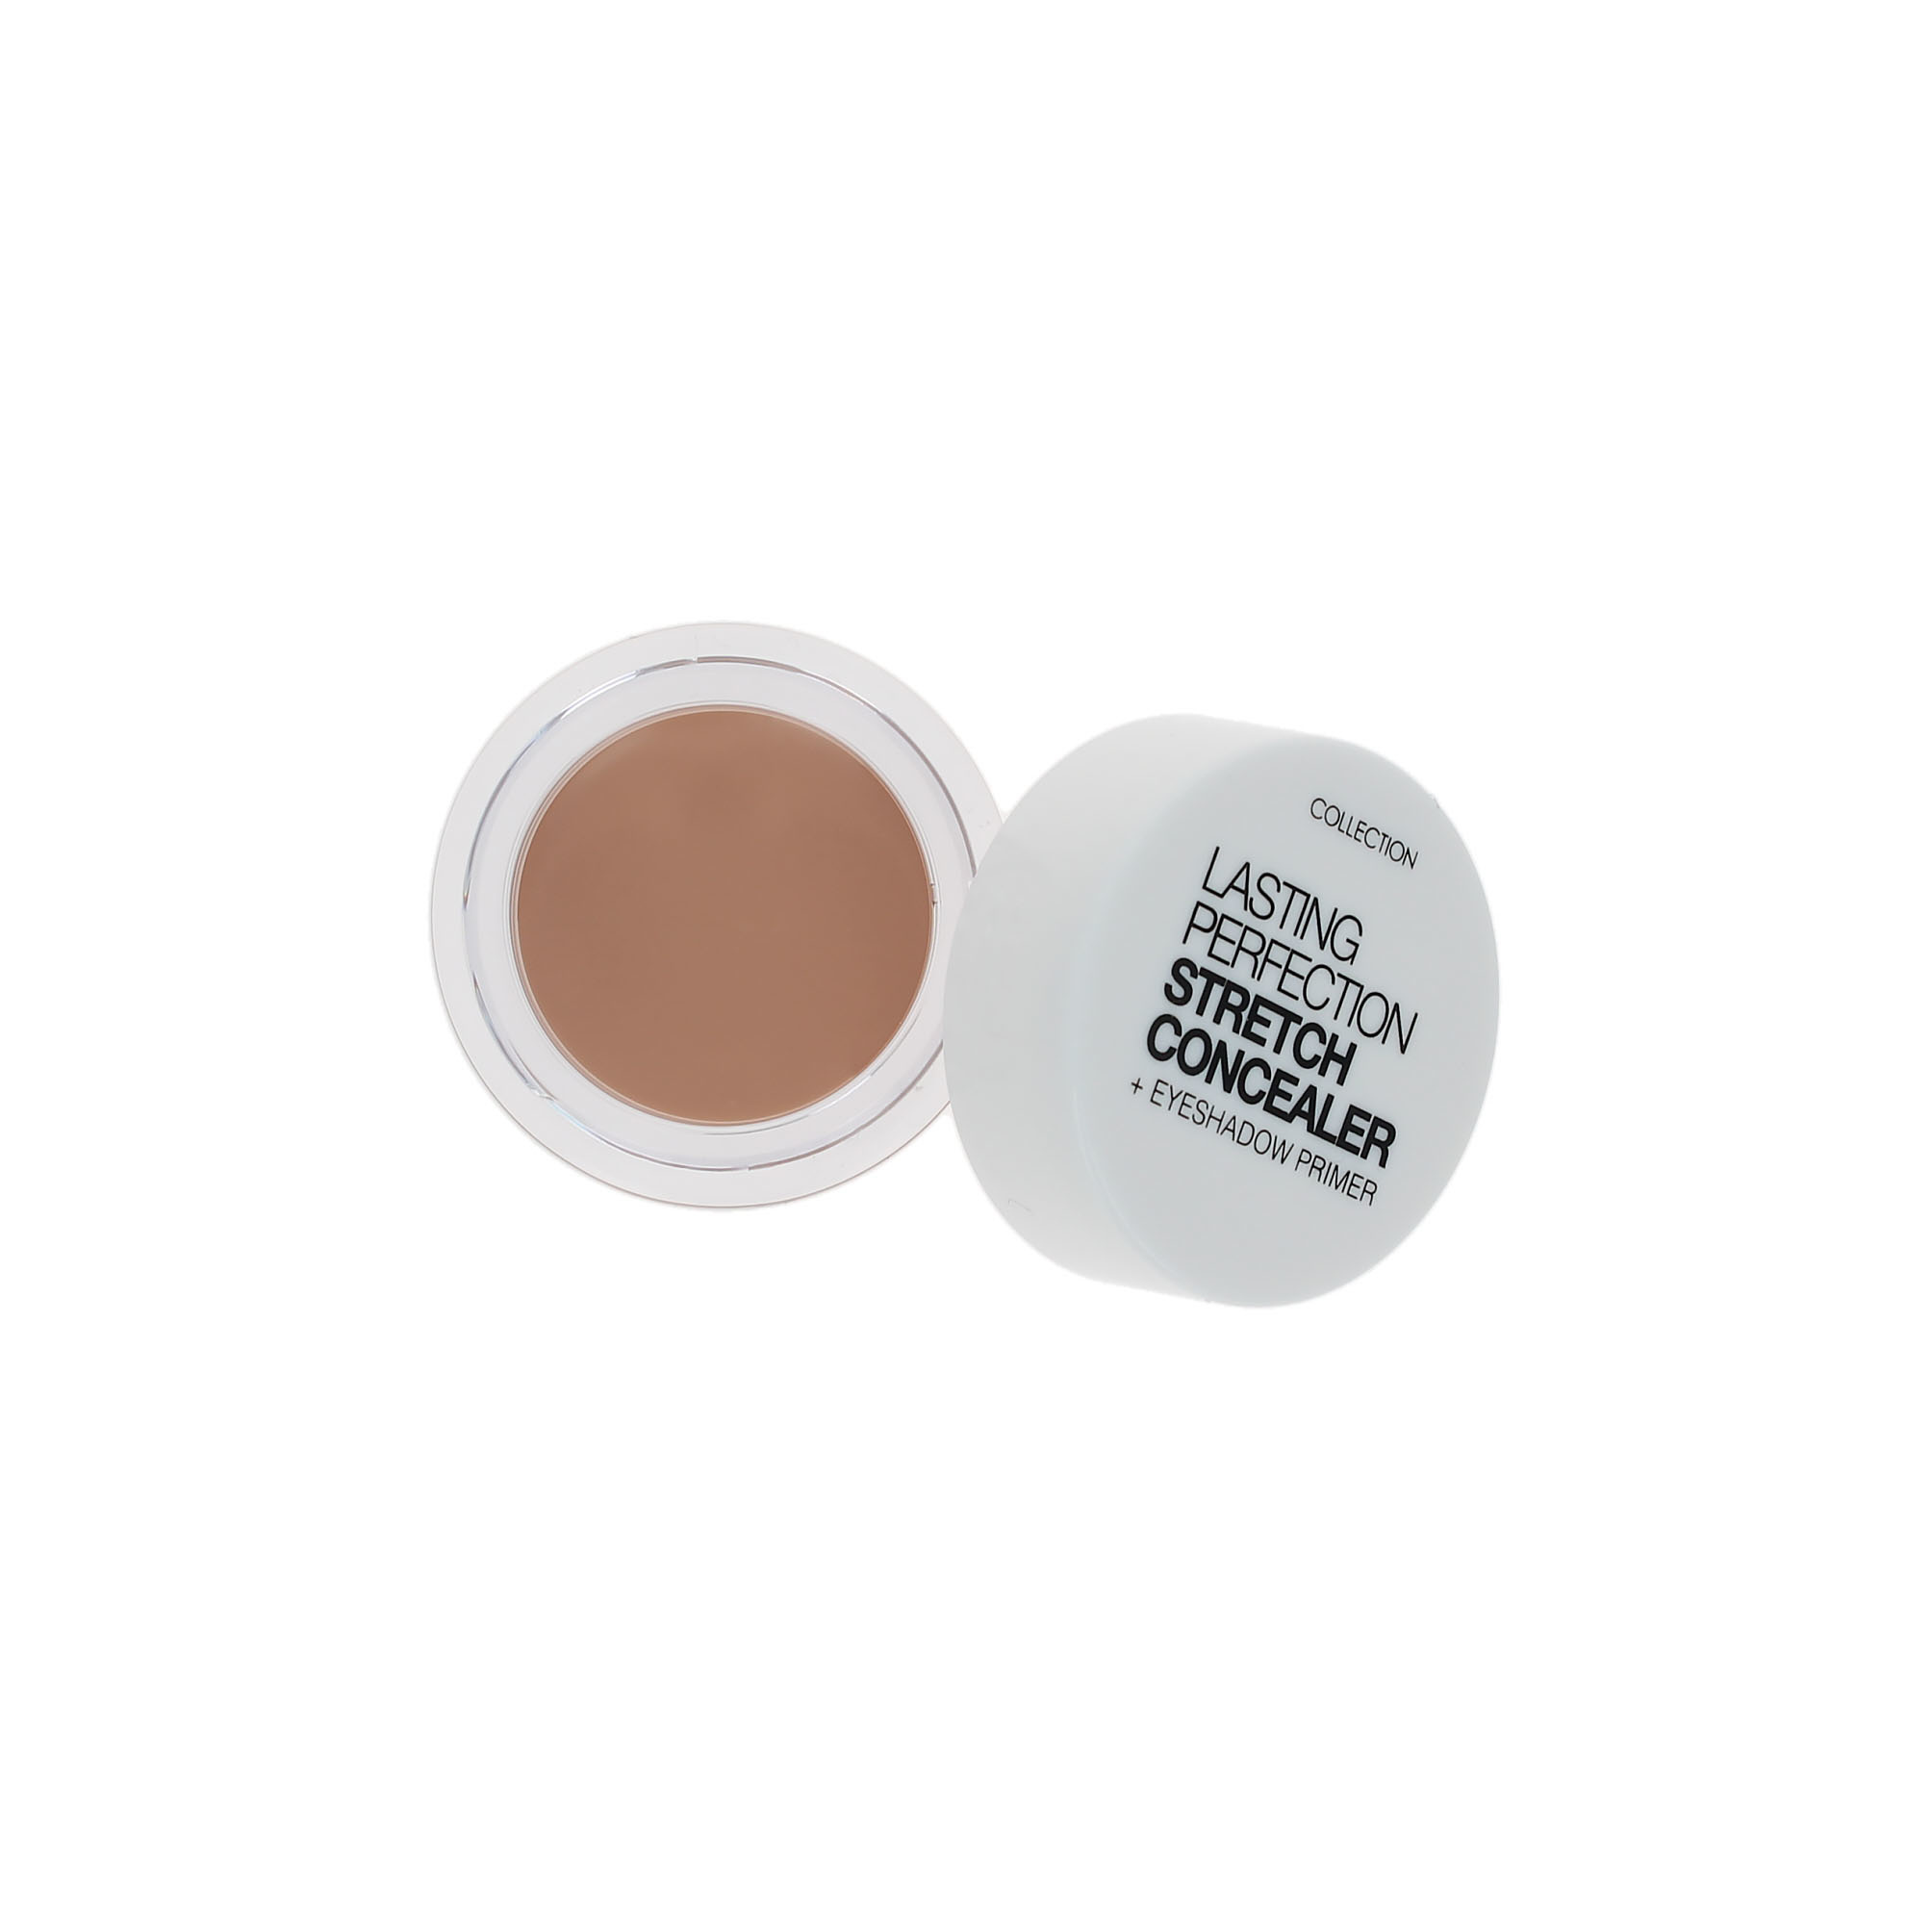 Collection Lasting Perfection Stretch Concealer + Eyeshadow Primer - 6 Cashew